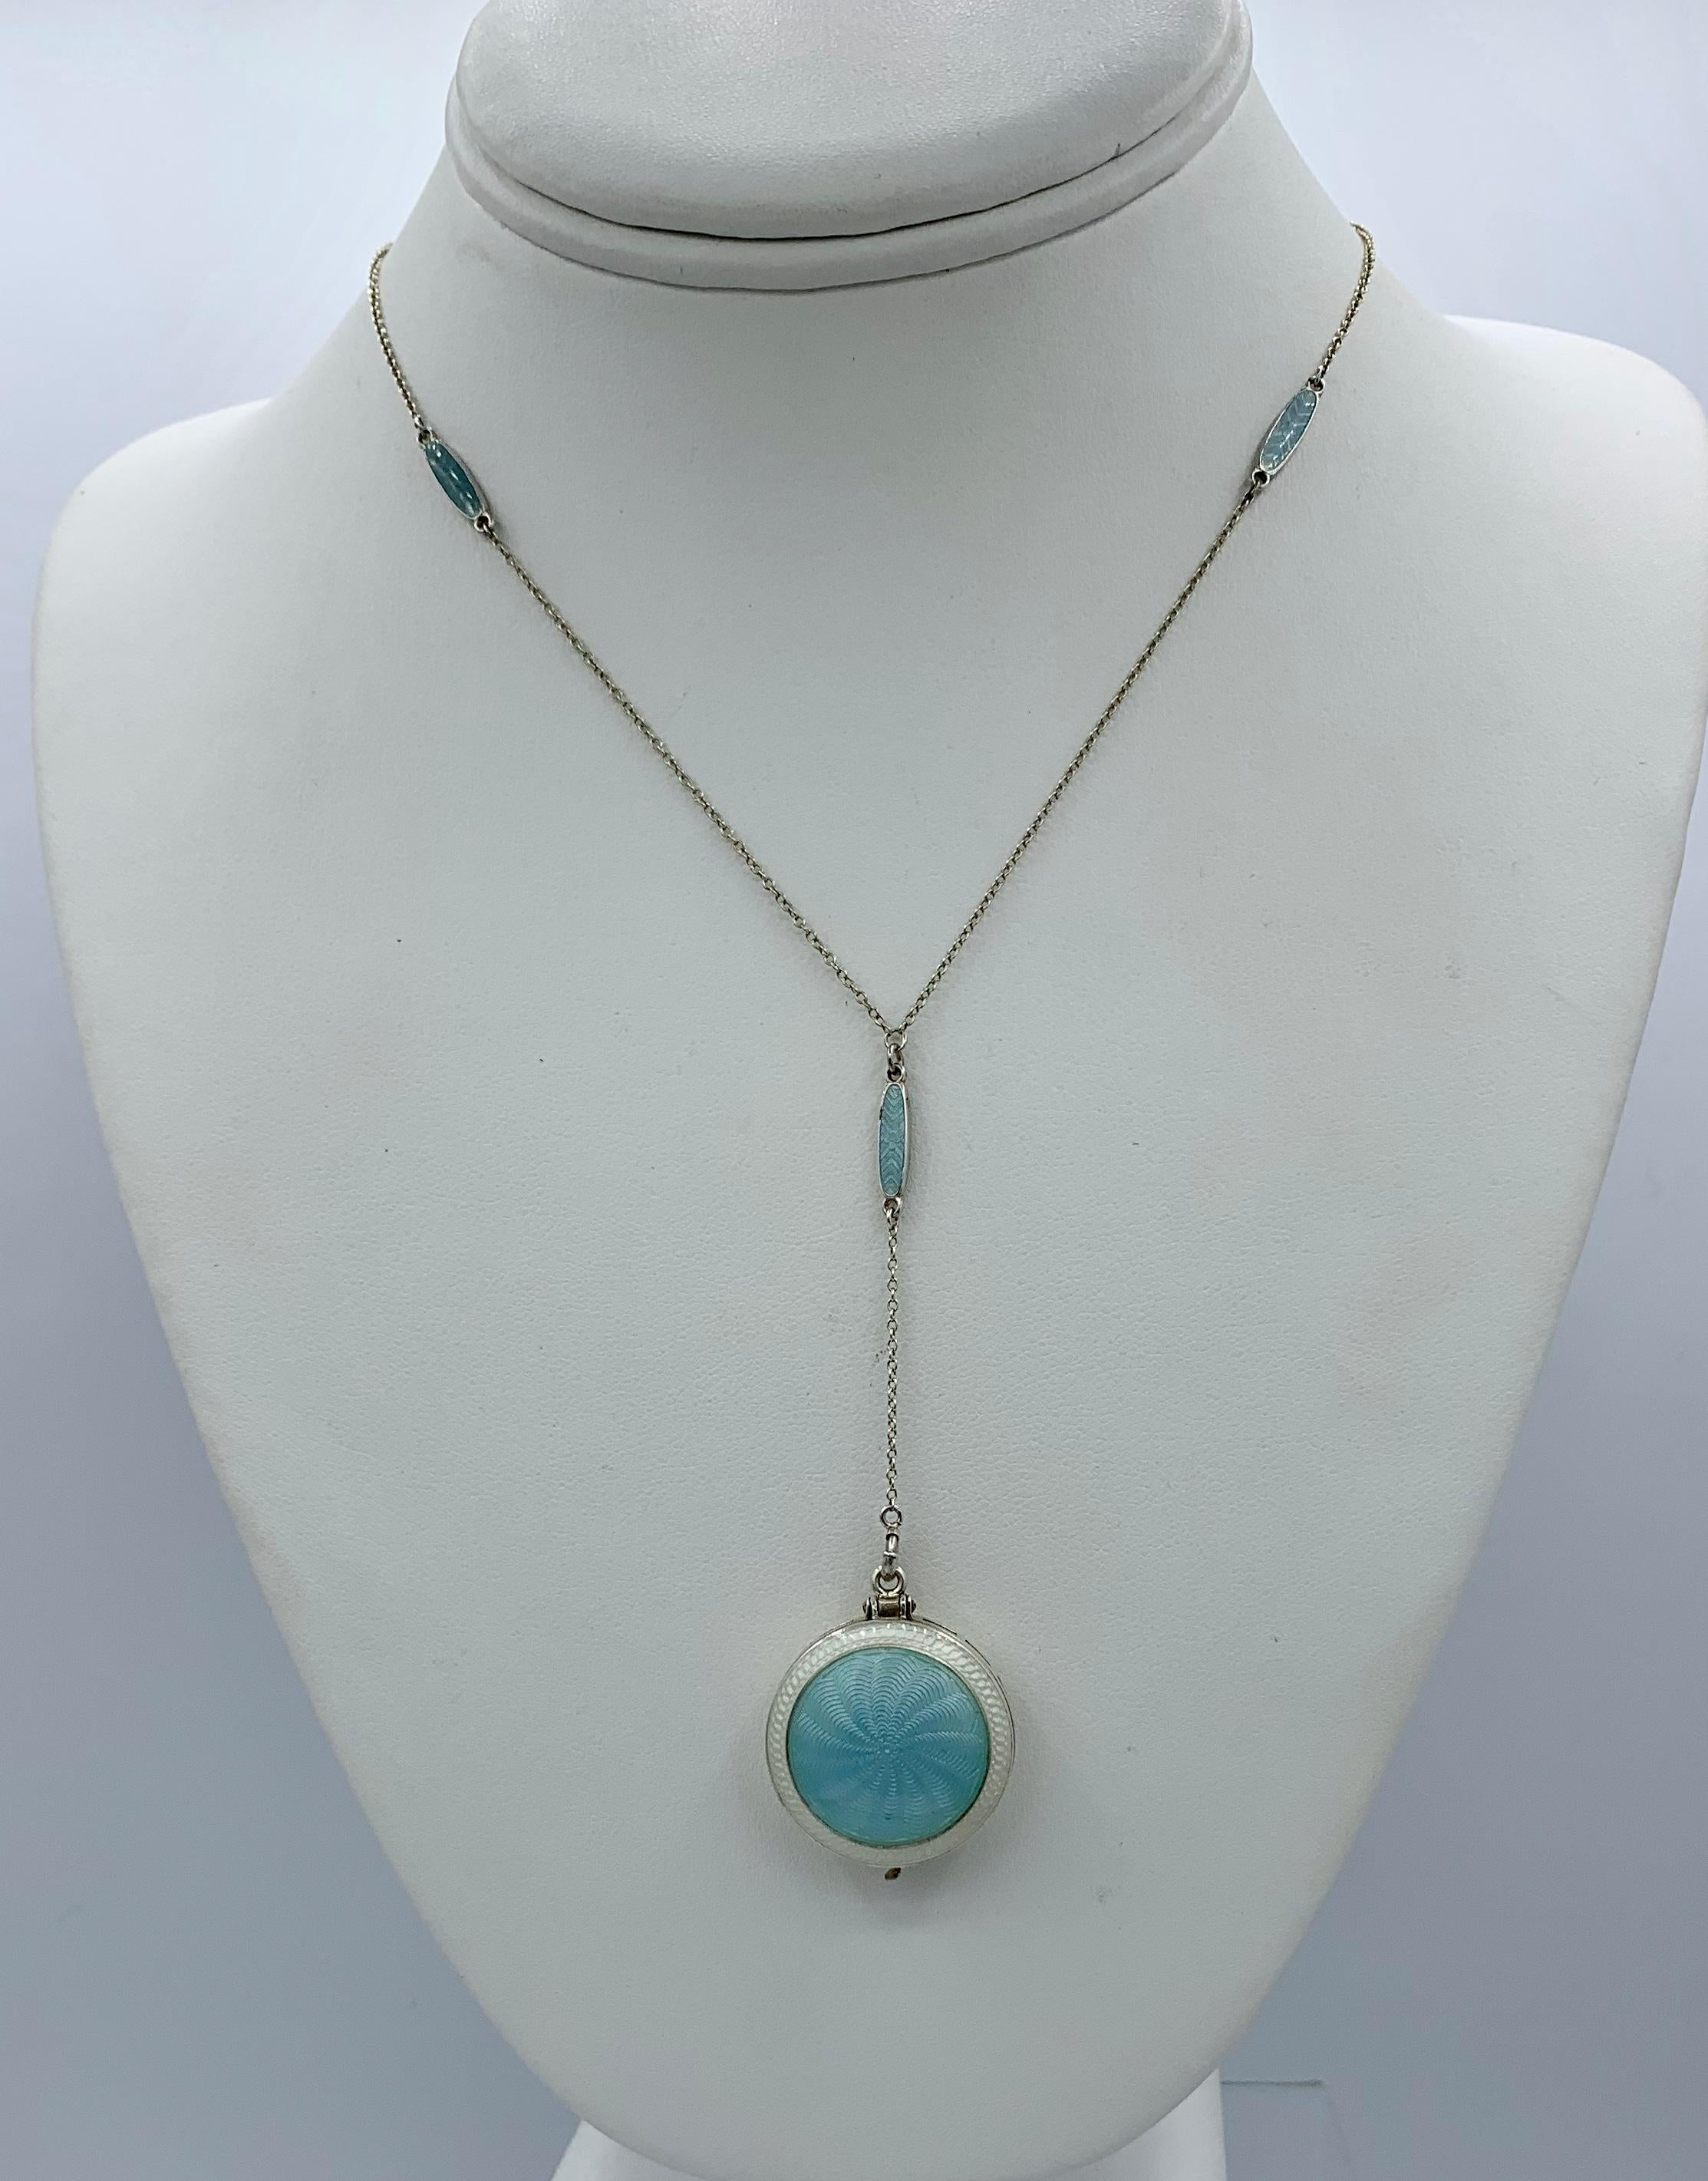 A rare and wonderful Edwardian - Art Deco Locket Pendant Necklace with gorgeous Robin's Egg Blue and White Guilloche Enamel in a pale blue blue color over Sterling Silver.  The reverse of the locket is engraved with the date 1917 and initials which